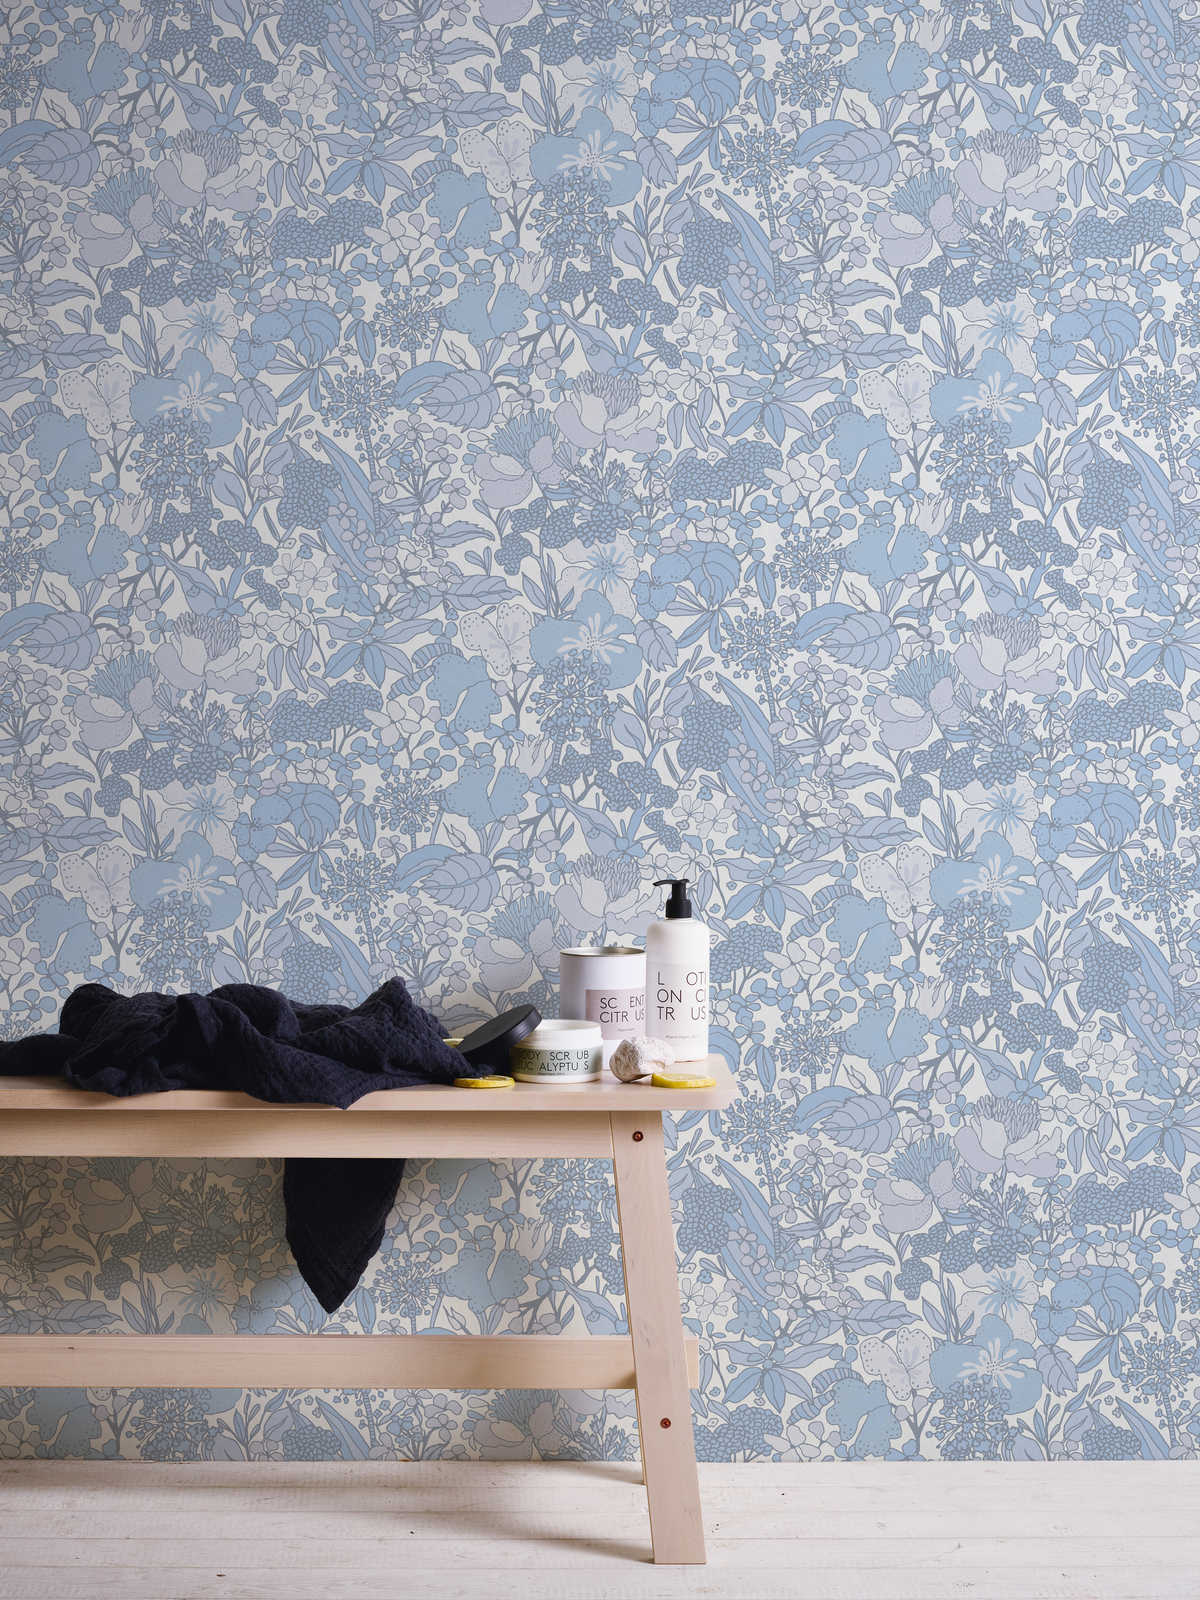             Wallpaper blue & white with 70s retro floral pattern - grey, blue, white
        